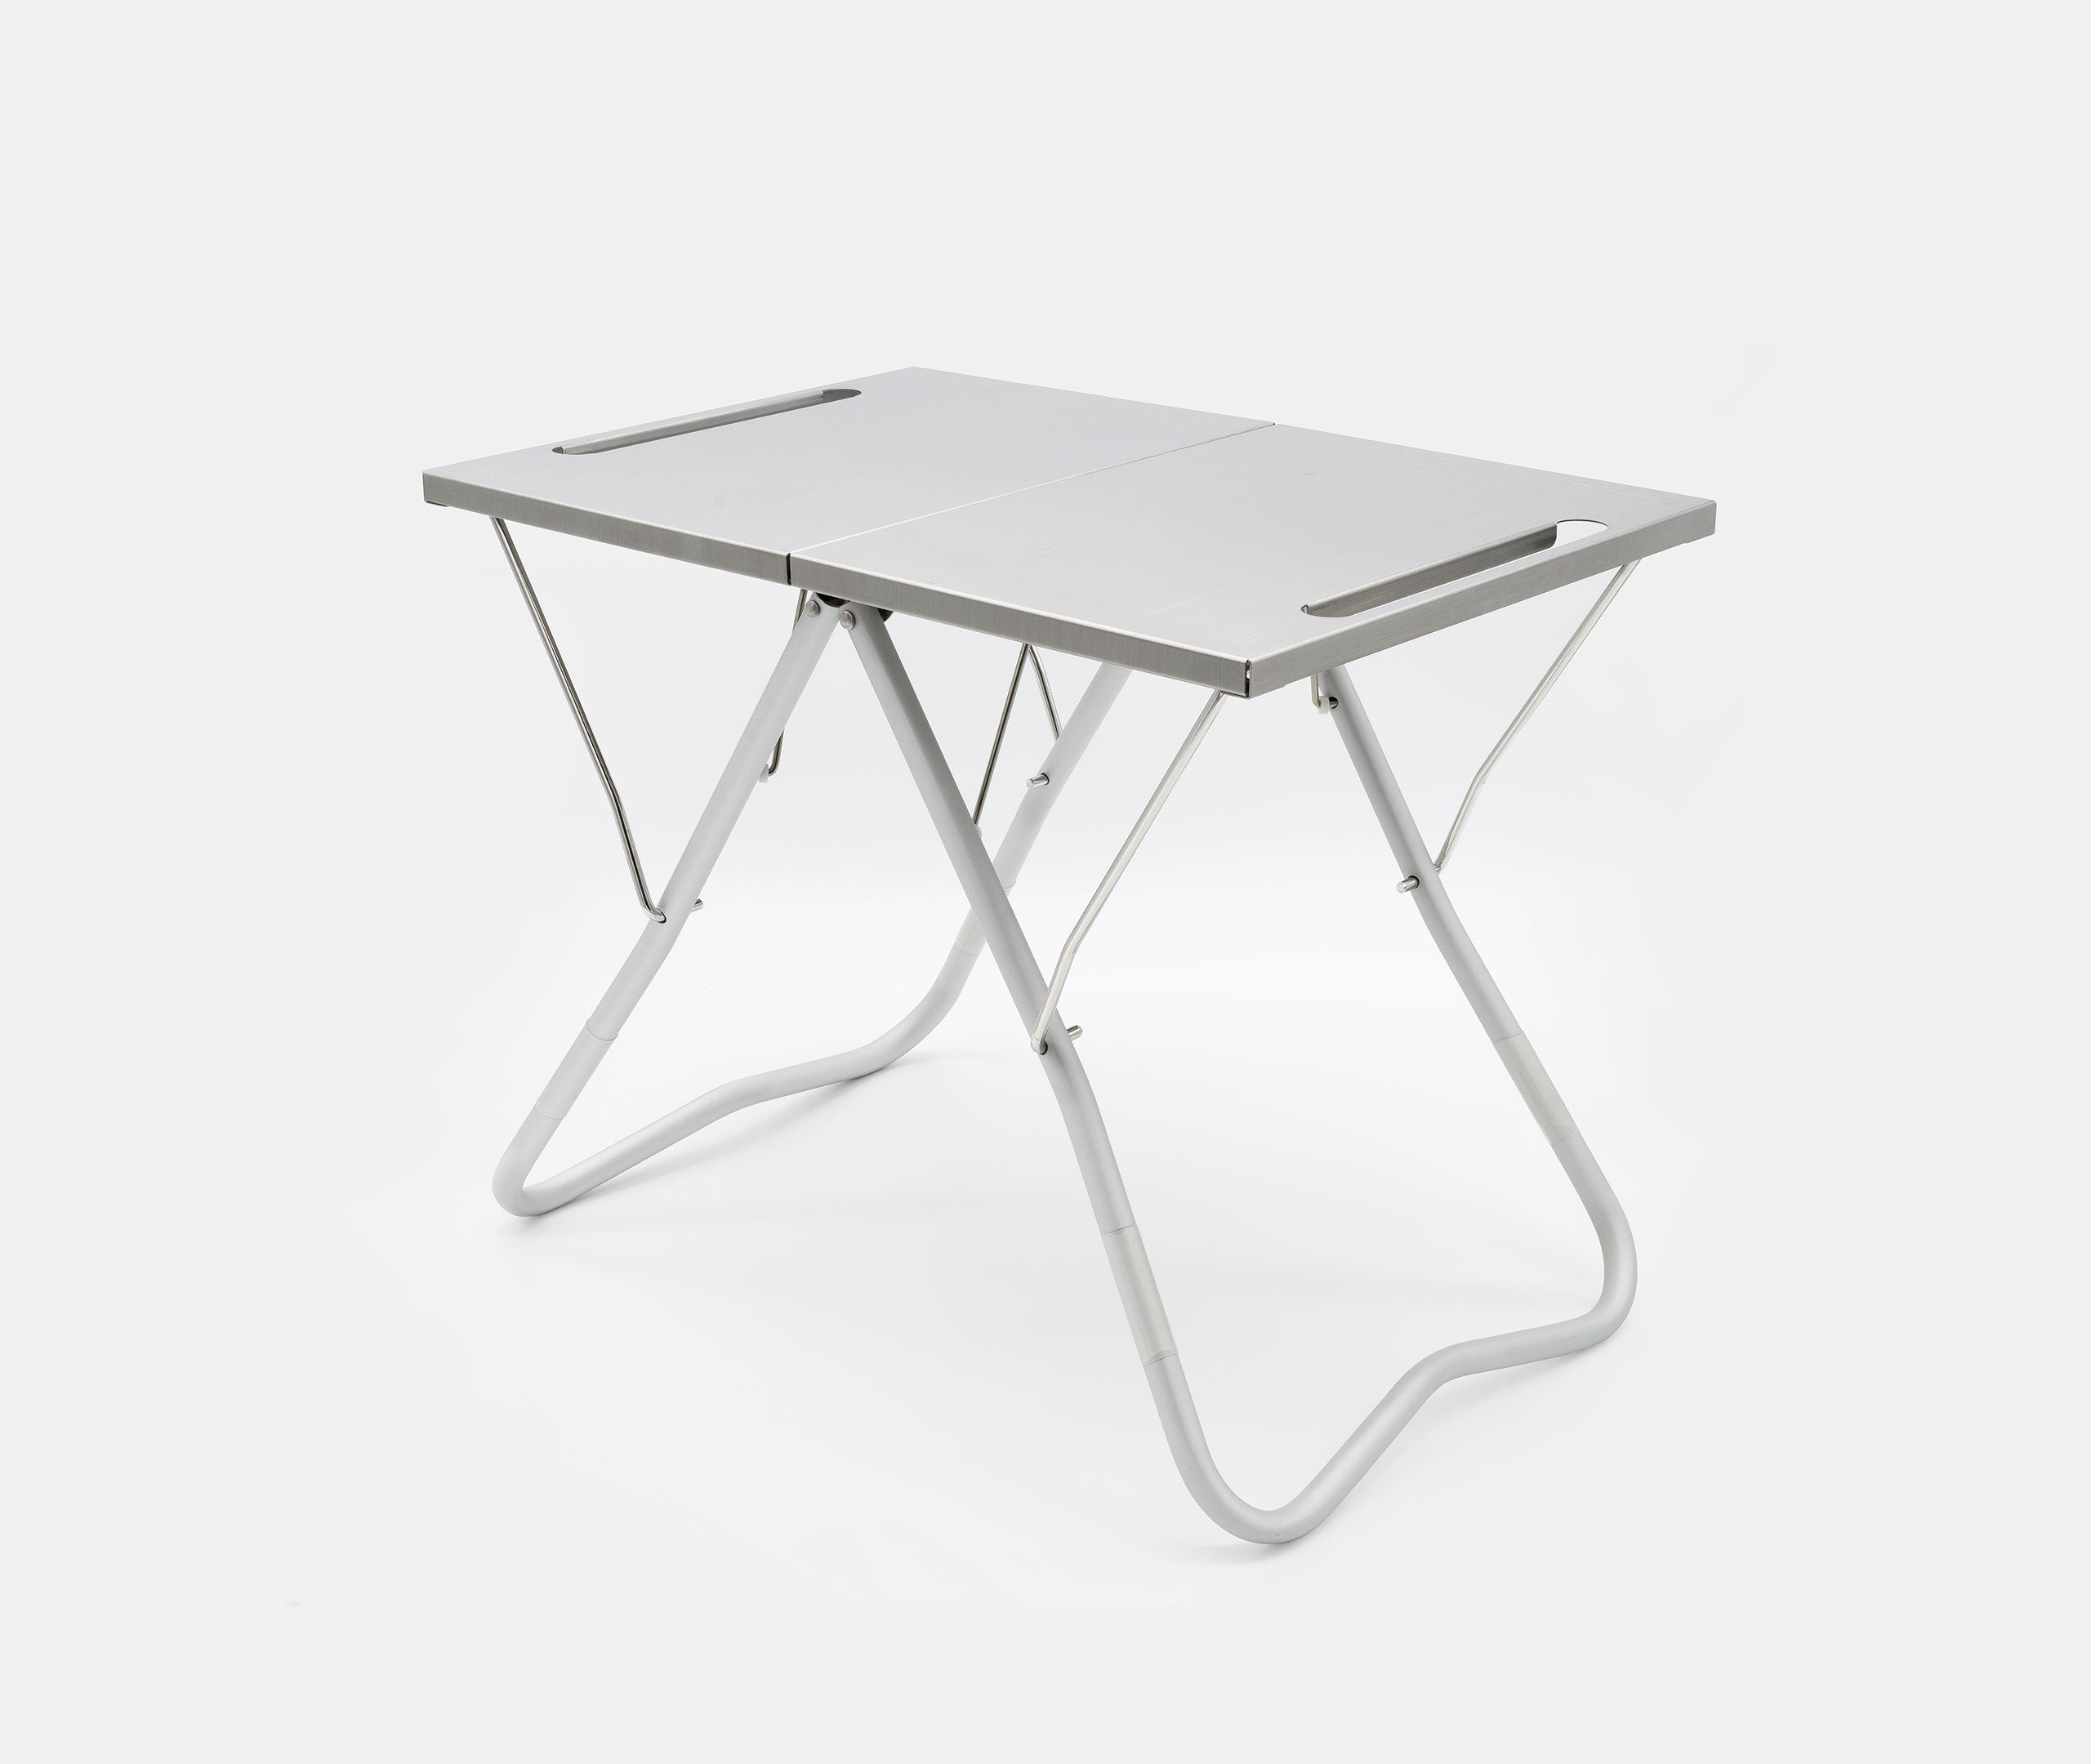 Snow Peak Stainless-steel Folding My Table for Camping – zen minded